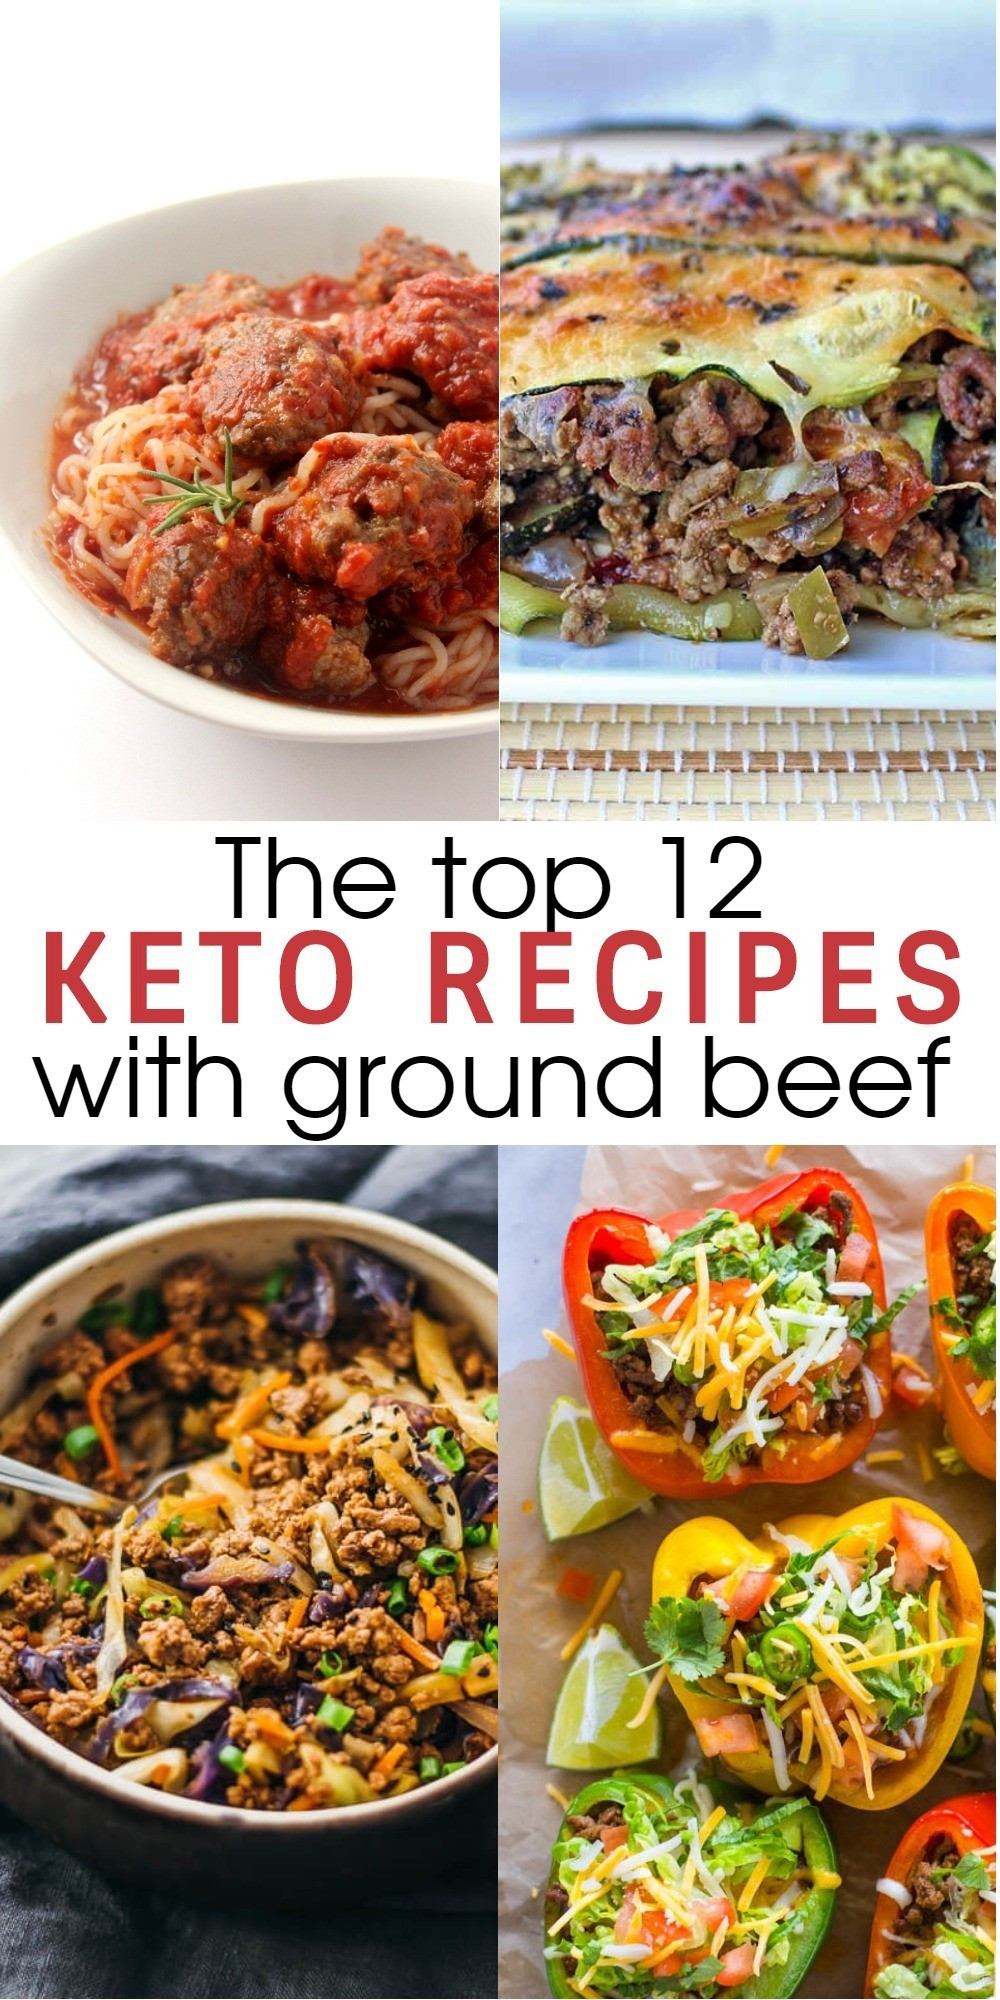 Keto Dinner Recipes Ground Beef
 12 Flavorful and Easy Keto Recipes With Ground Beef To Try